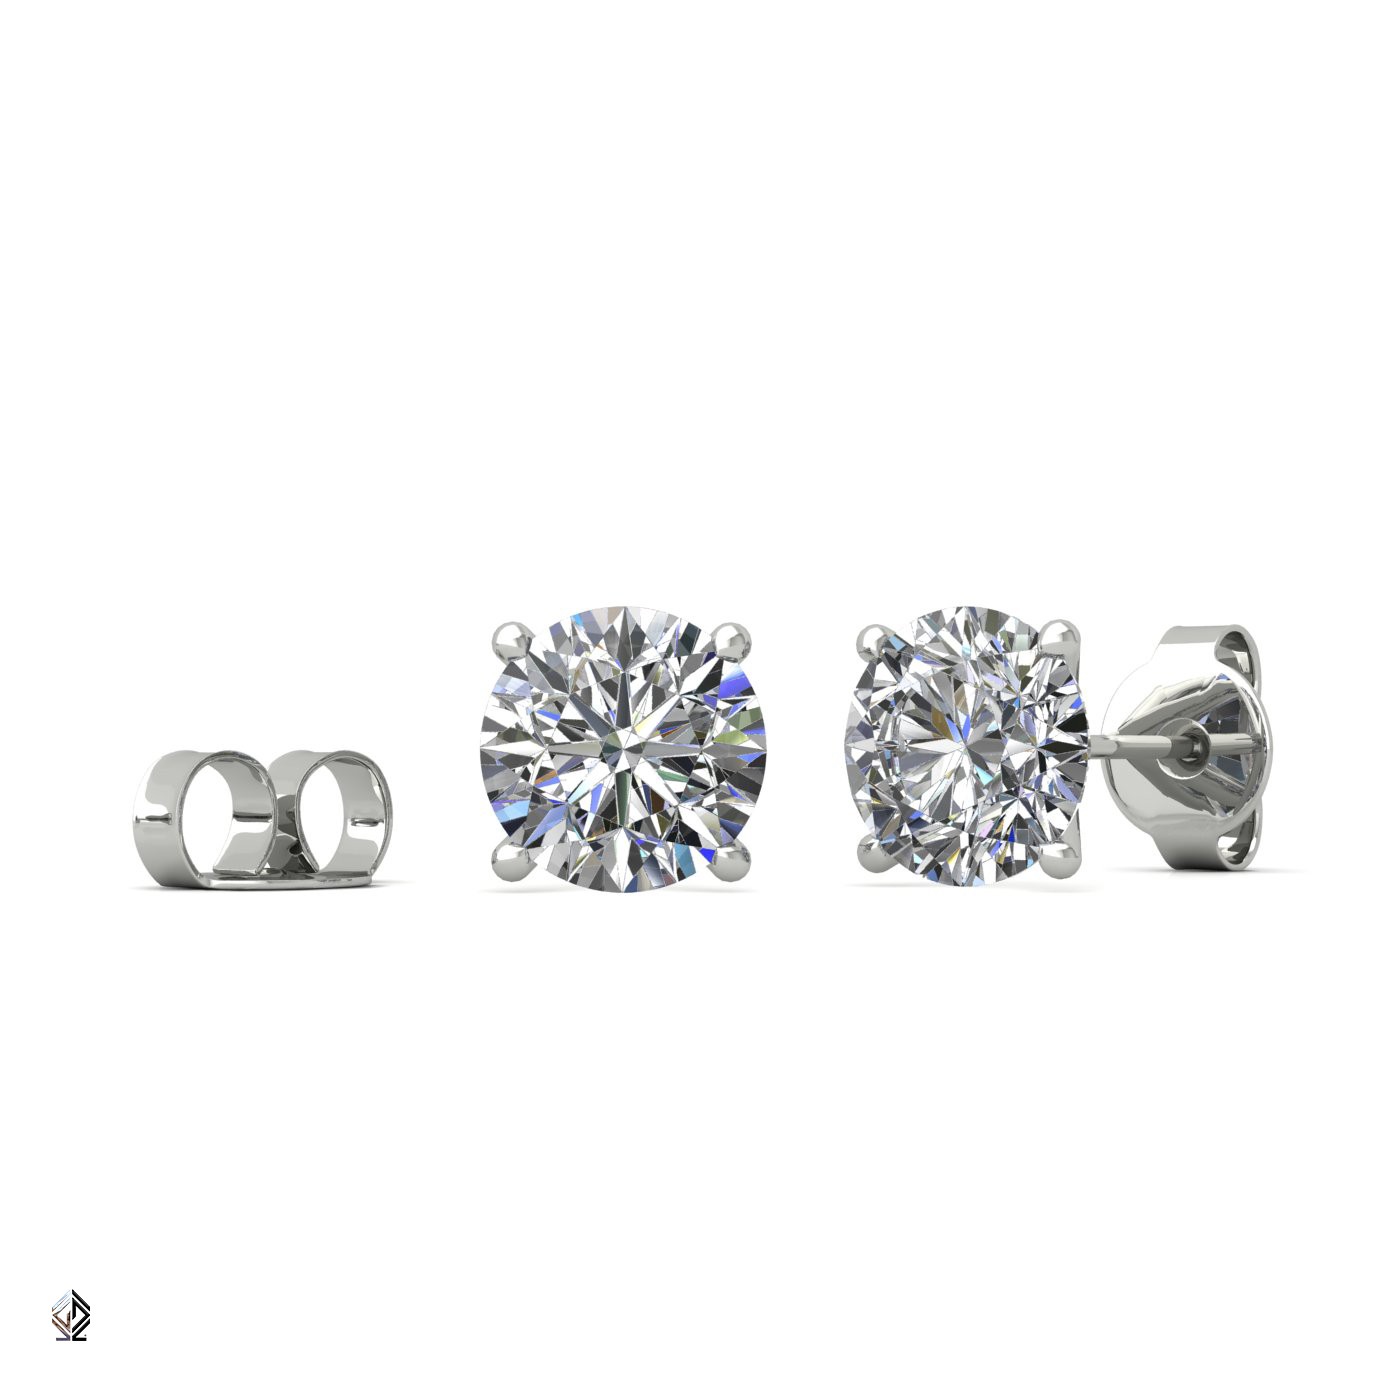 18k white gold 1.5 ct each (3,0 tcw) 4 prongs round cut classic diamond earring studs Photos & images